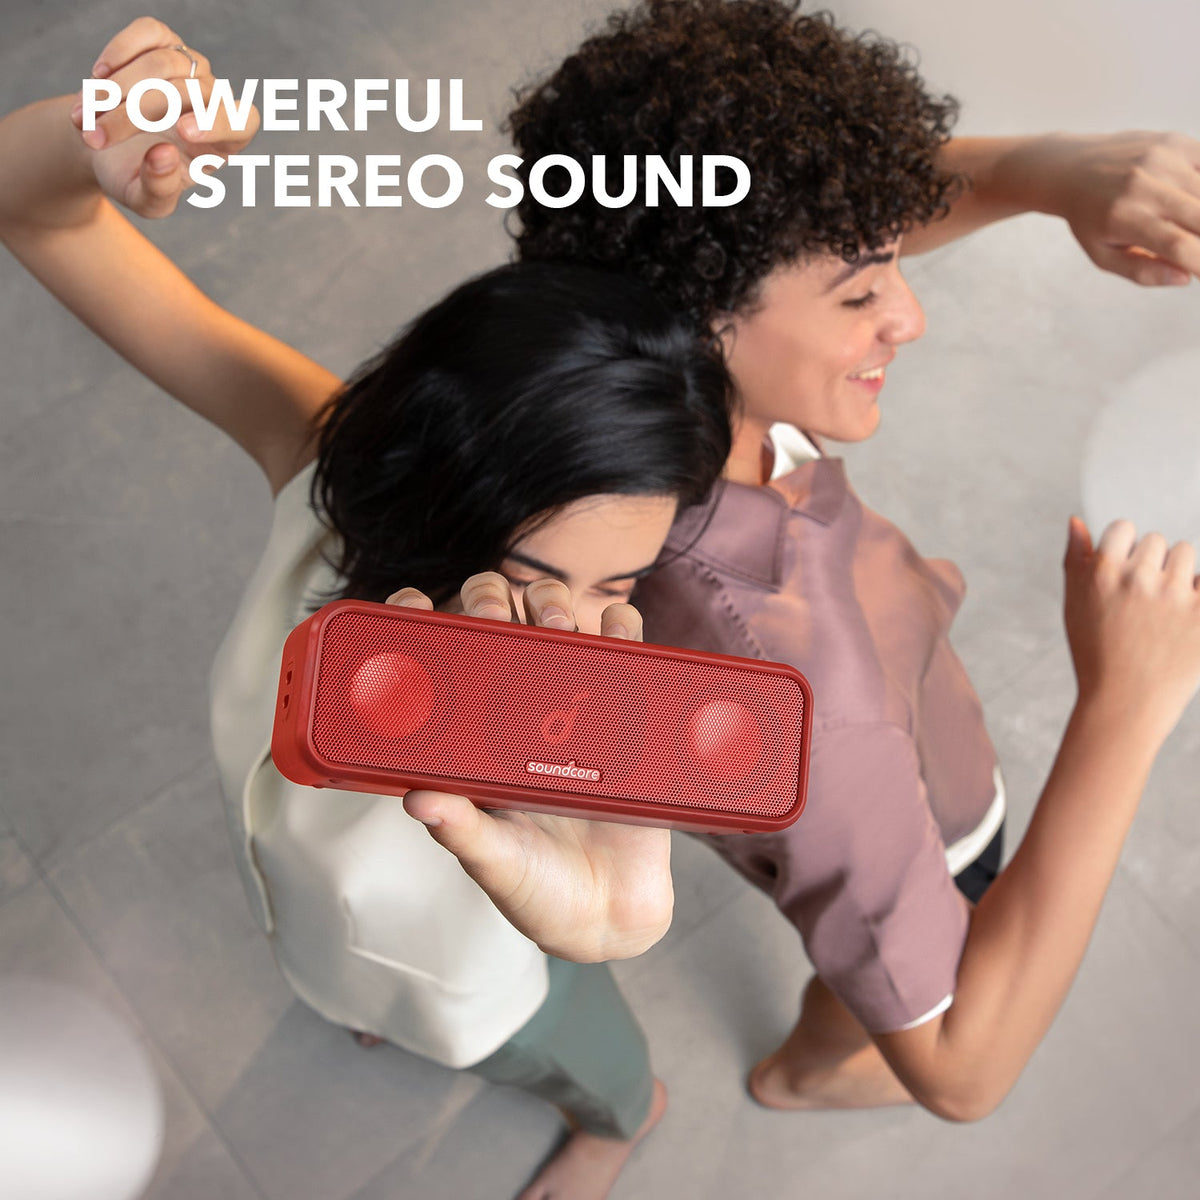 soundcore 3 | Bluetooth Speaker with Stereo Sound